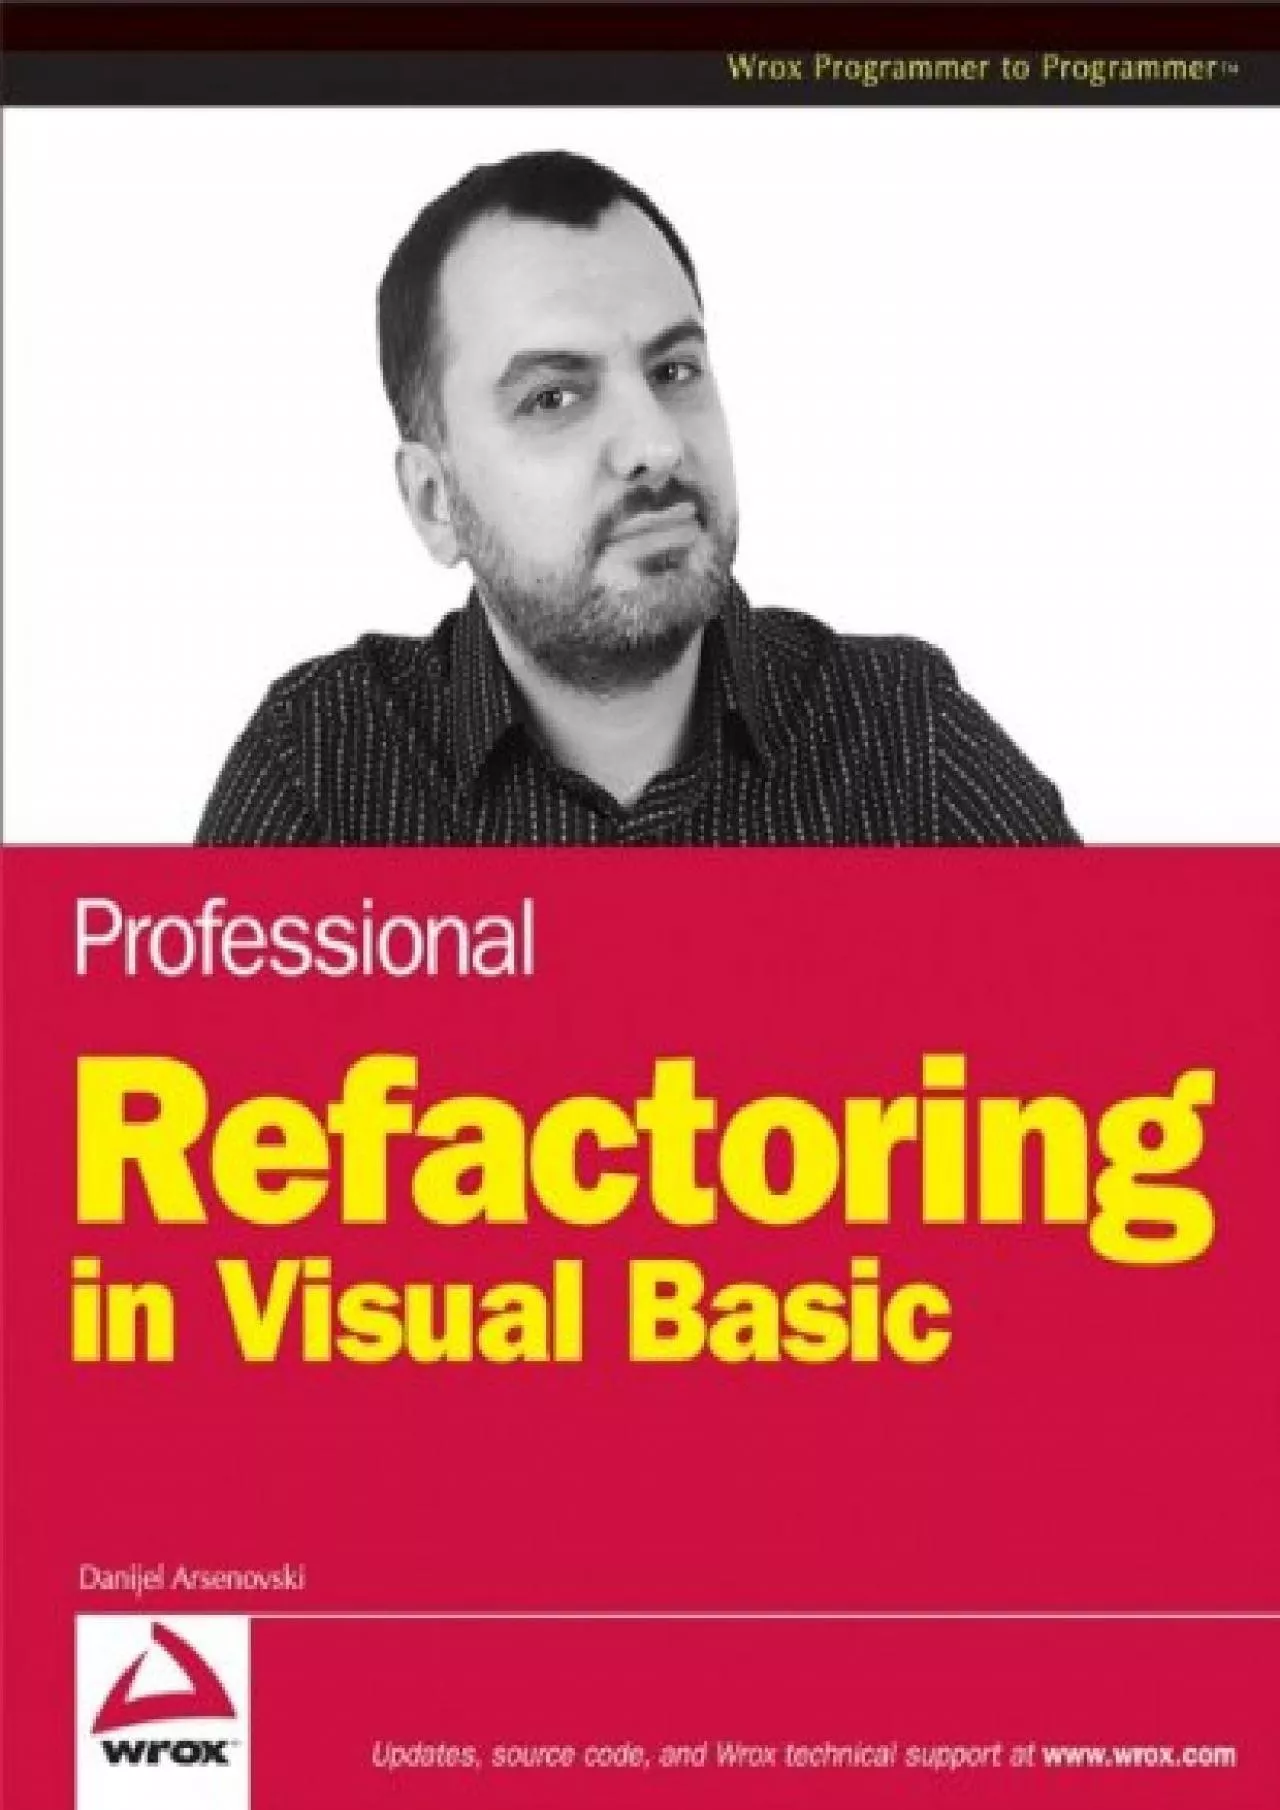 [BEST]-Professional Refactoring in Visual Basic (Programmer to Programmer)